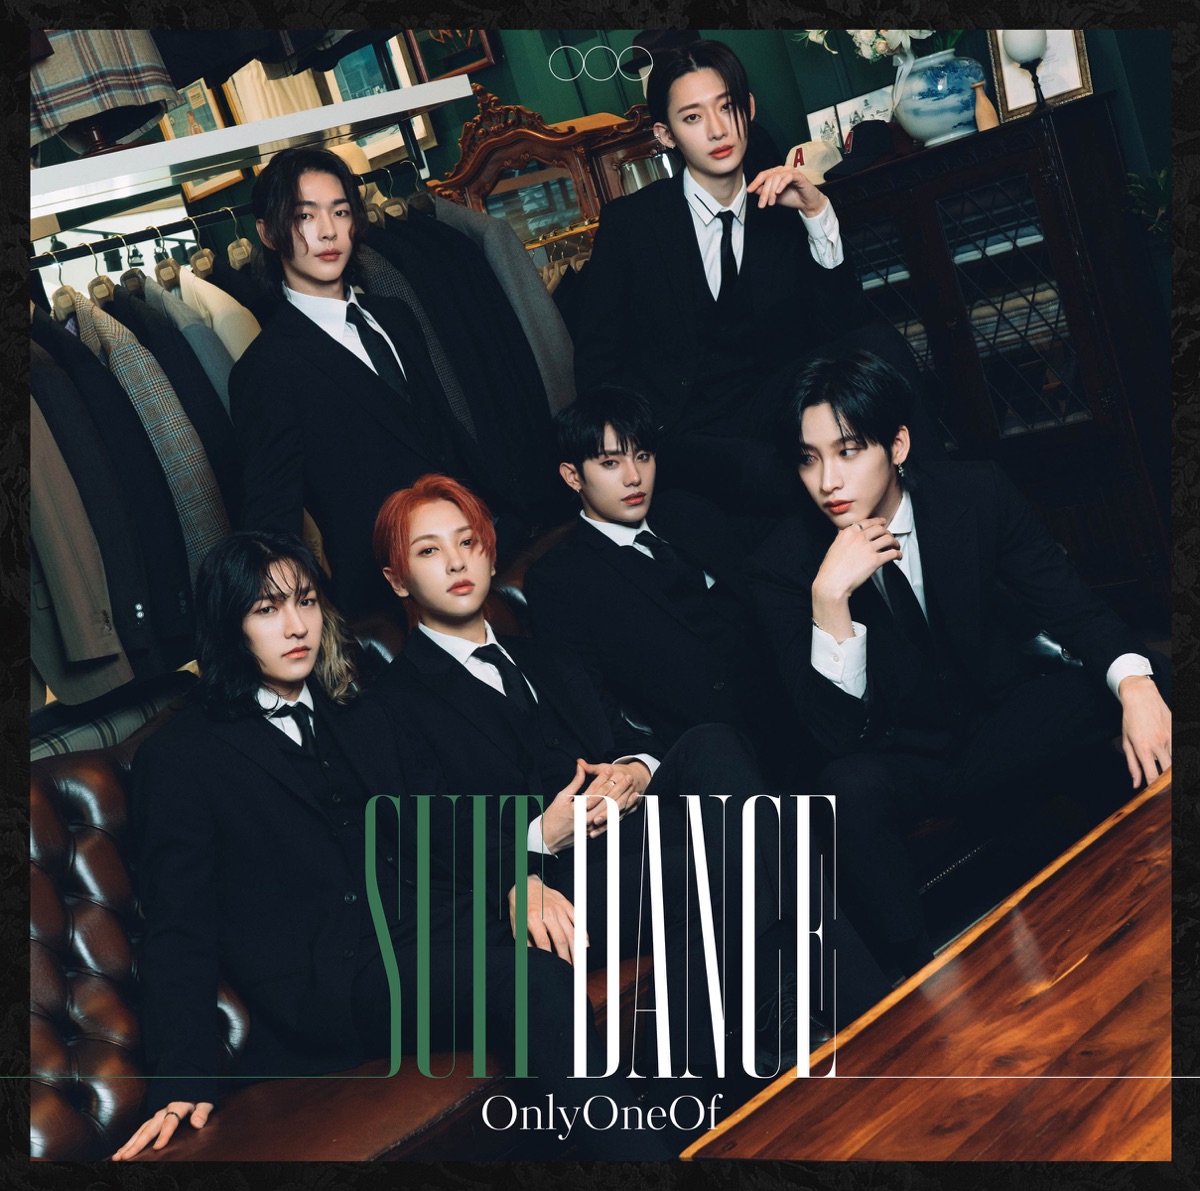 OnlyOneOf – suit dance (Japanese ver.) – EP